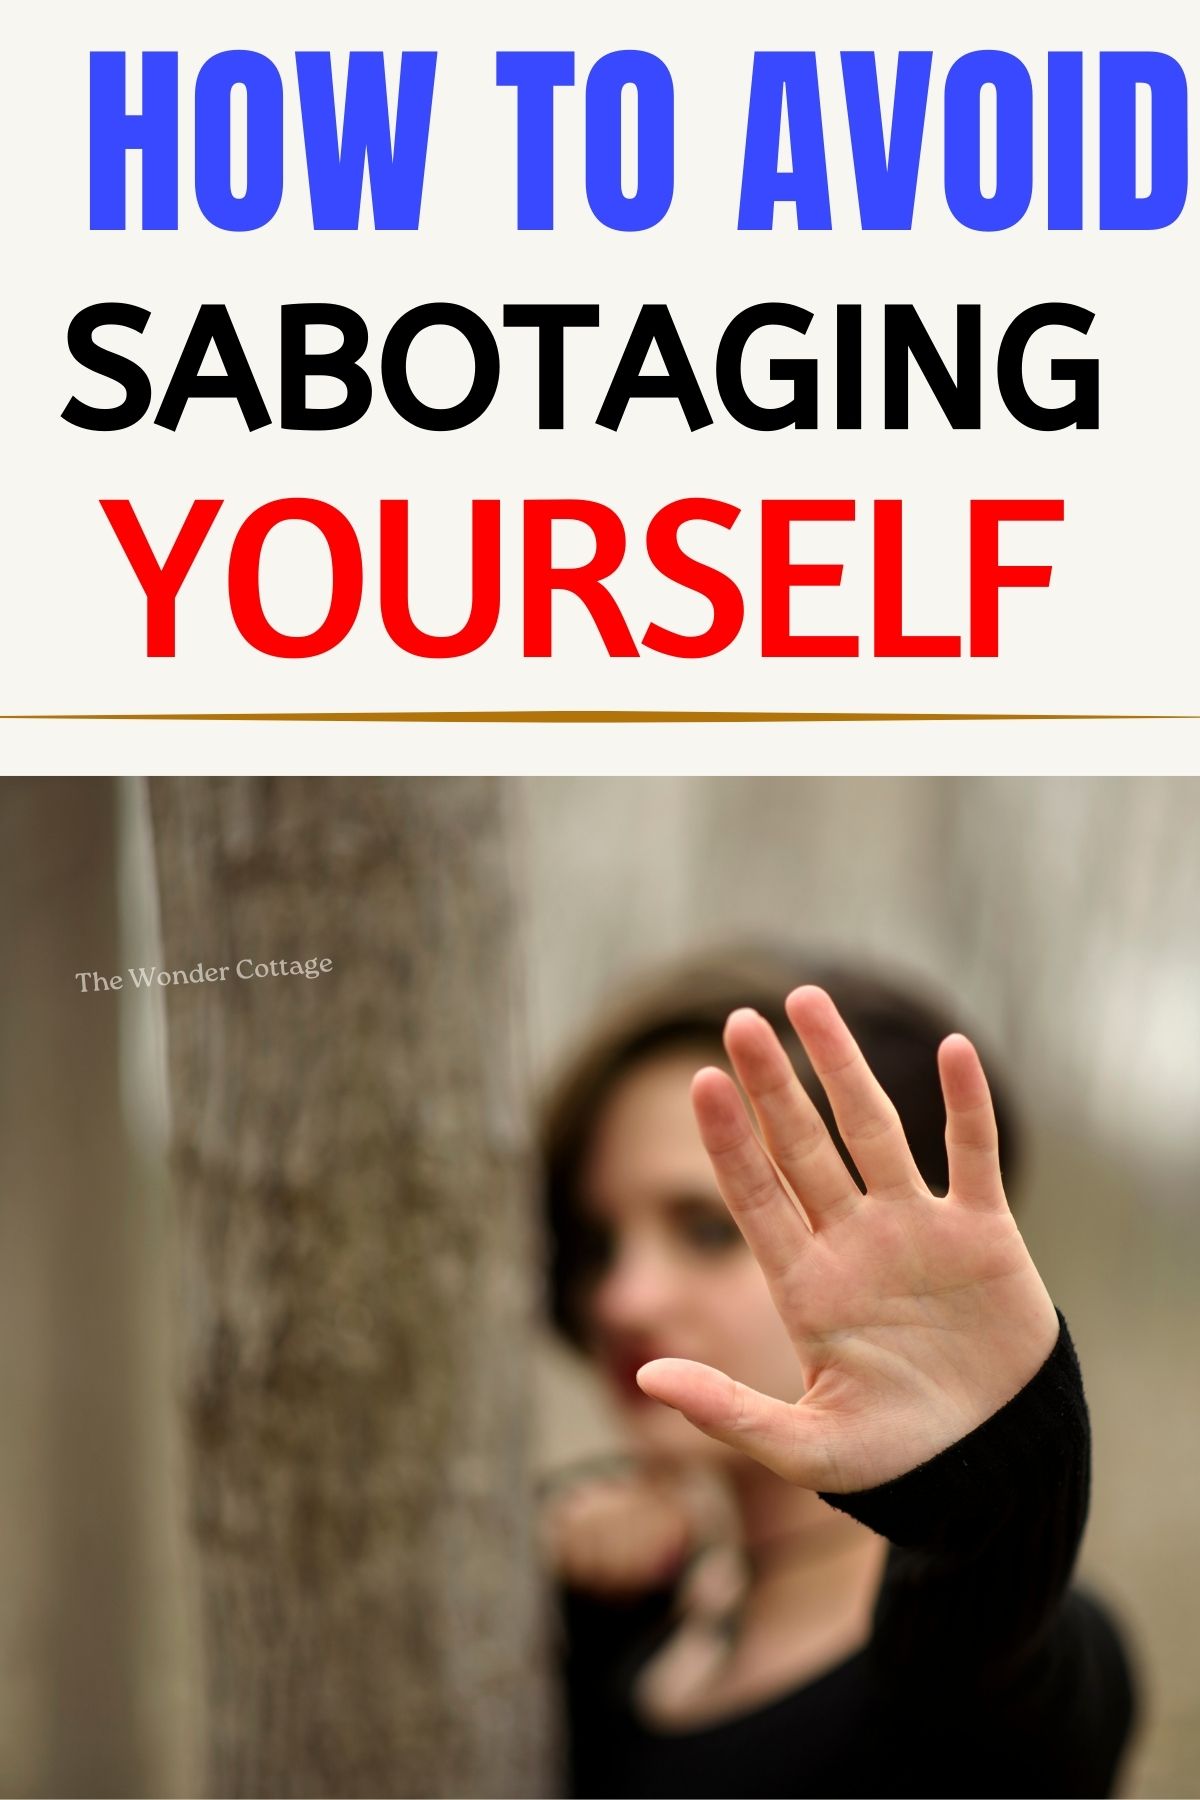 How To Avoid Sabotaging Yourself